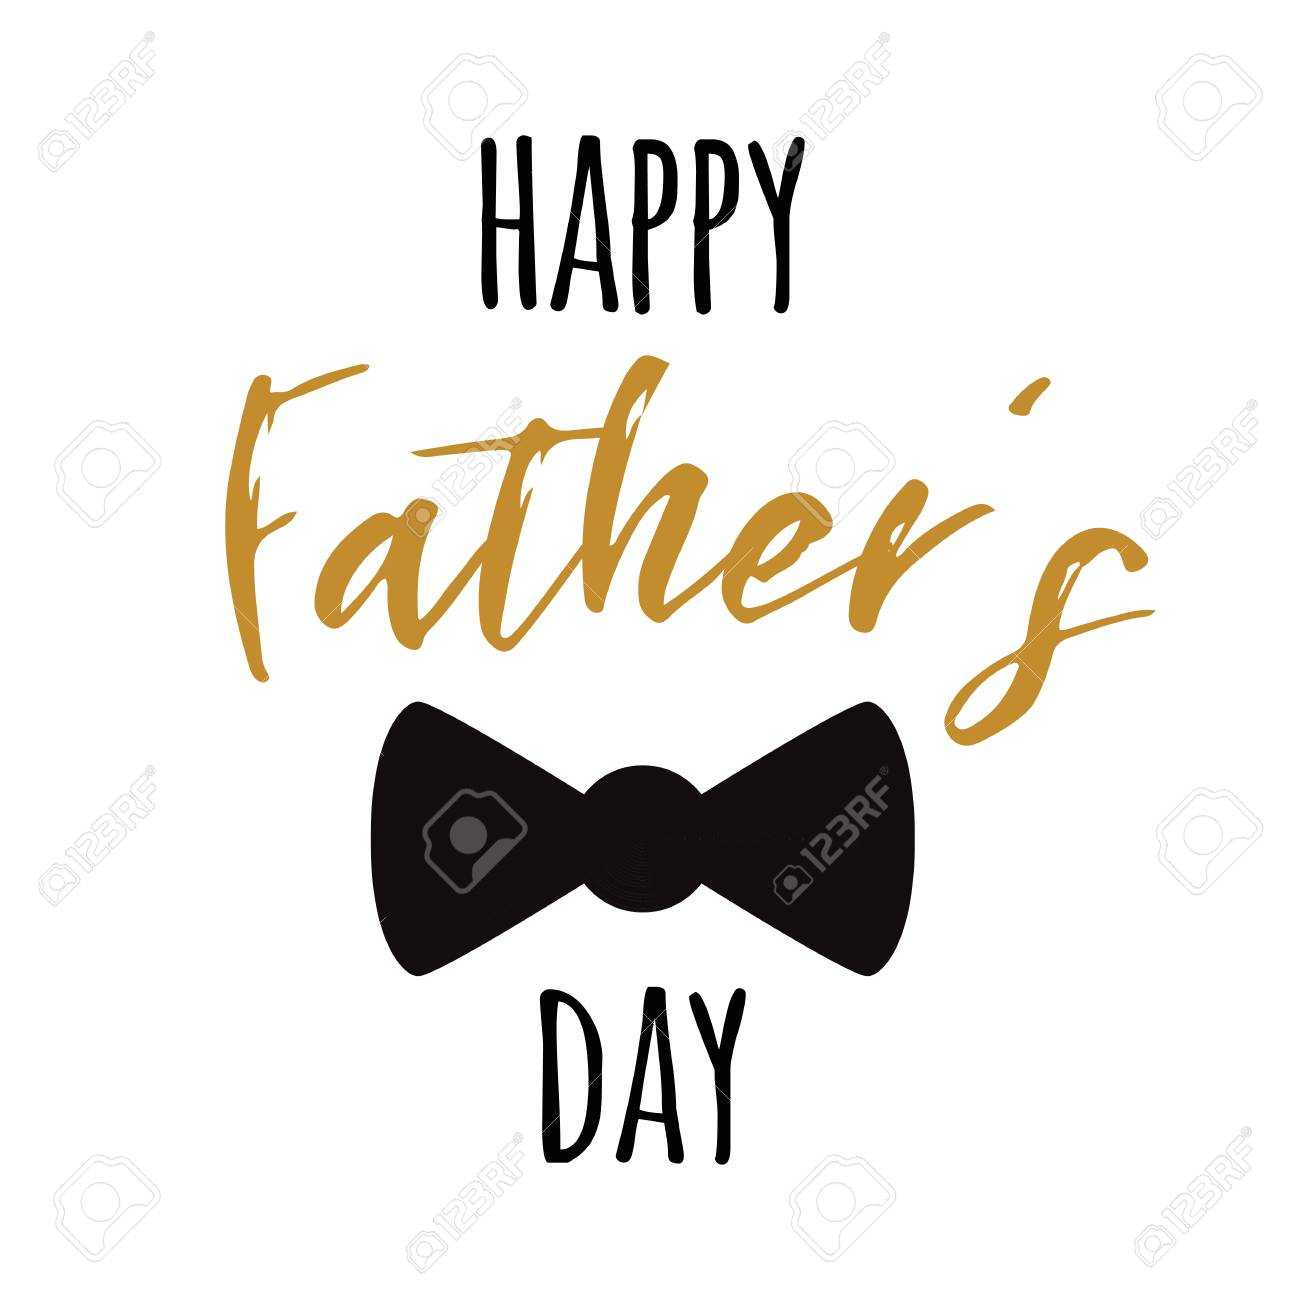 Fathers Day Banner Design With Lettering, Black Bow Tie Butterfly For Tie Banner Template